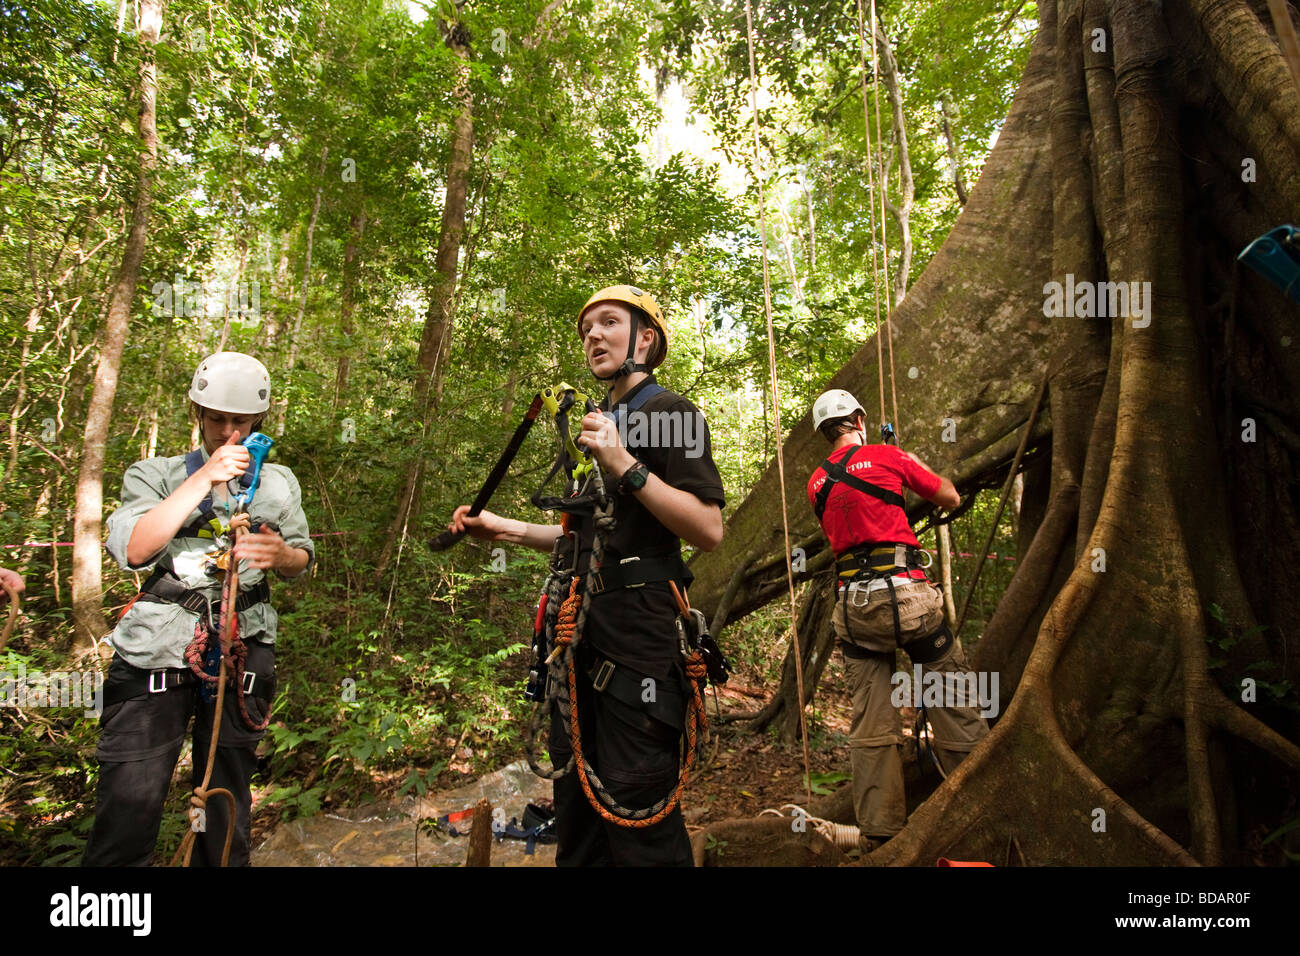 Indonesia Sulawesi Operation Wallacea Lambusango forest reserve teaching canopy access group Stock Photo